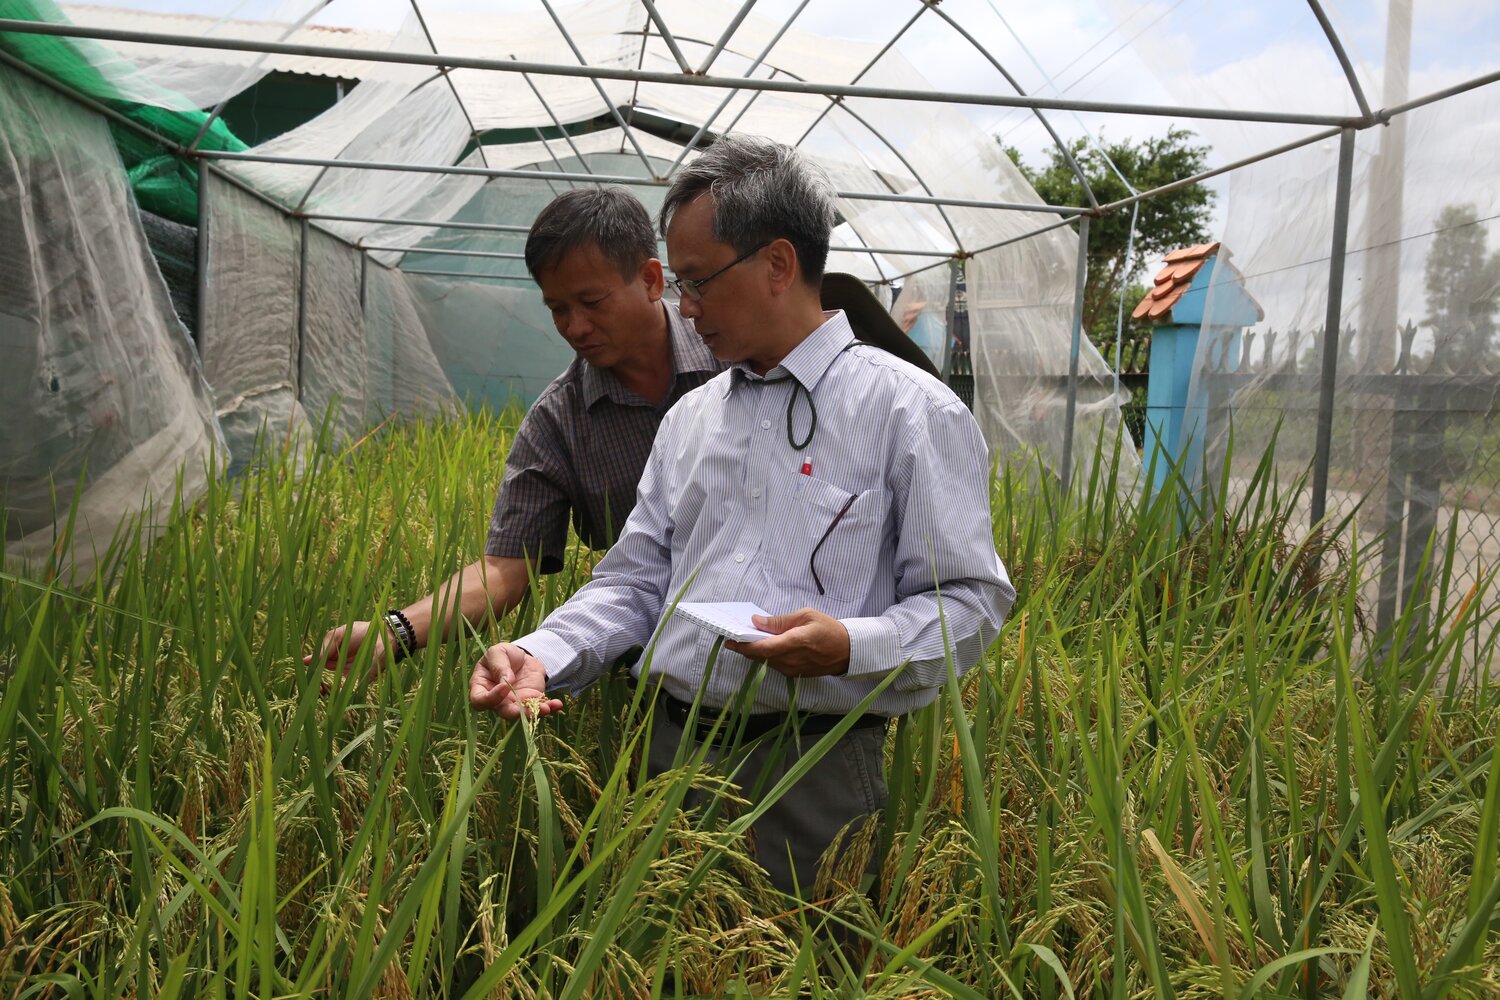 Professor Huynh Quang Tin, from the Mekong Delta Development Research Institute, Can Tho University, in Vietnam, and Crop Wild Relatives rice pre-breeding project leader, examines new lines of rice developed by Mr. Nguyen Anh Dung (Left), Seed Club Leader of the Dinh An Seed Club in the Dong Thap province of the Mekong Delta. Photo: L.M. Salazar